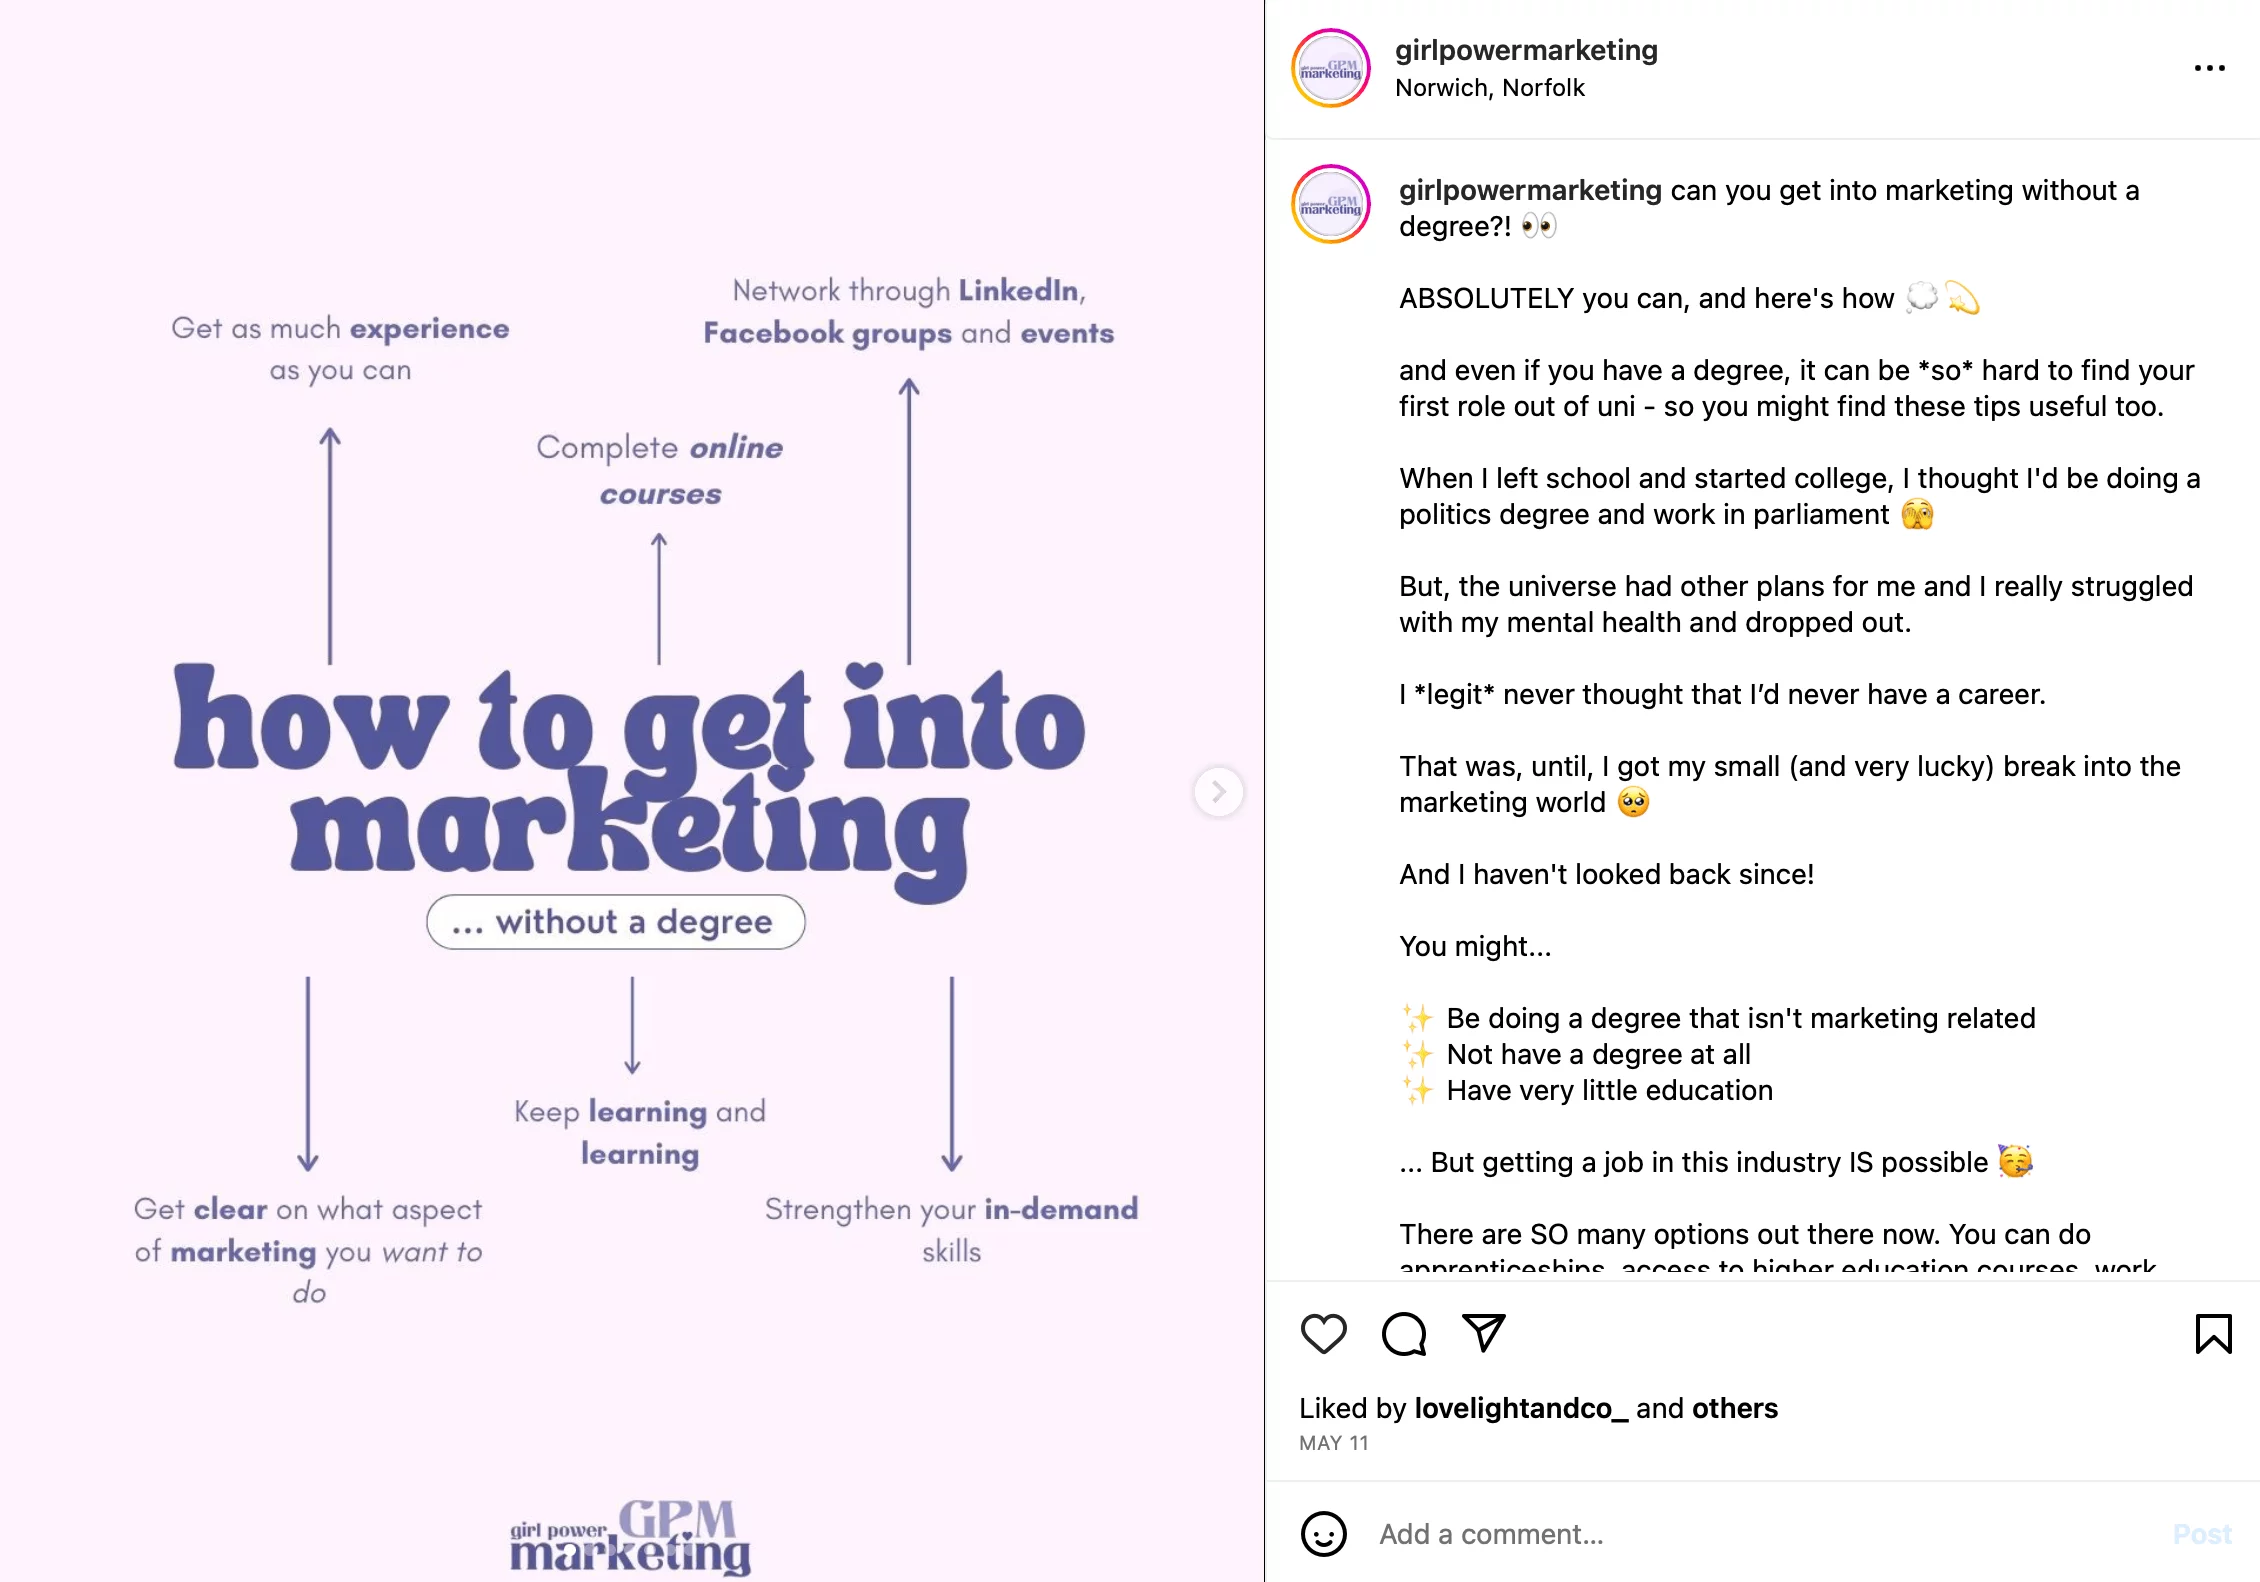 Instagram post with a graphic representation of 6 steps how to get into marketing, made by @girlpowermarketing account